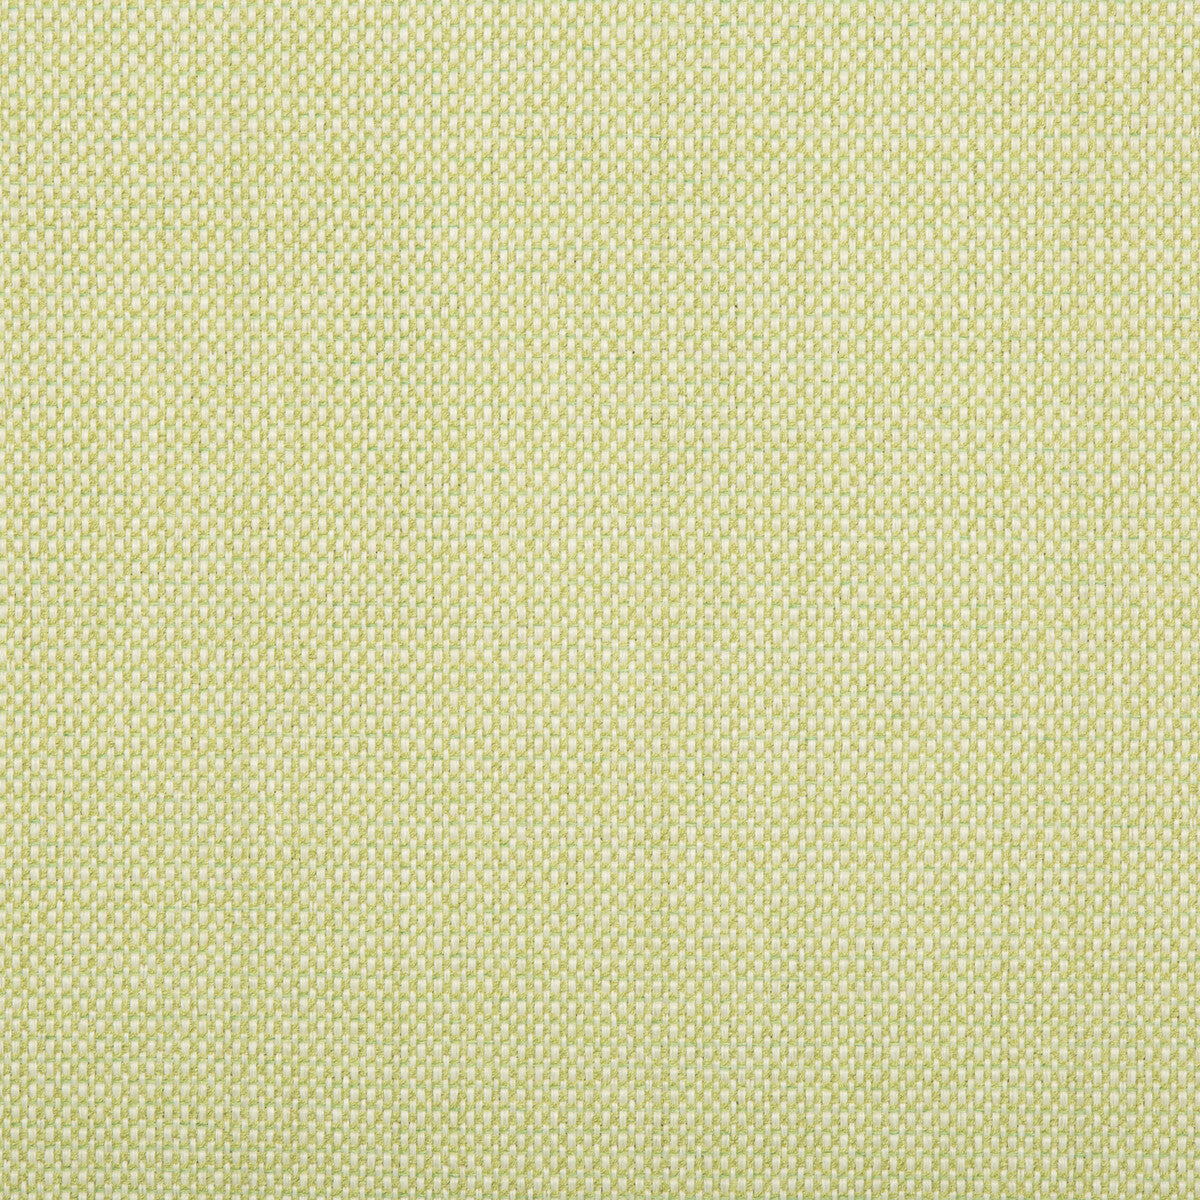 Quayside fabric in celery color - pattern 34525.23.0 - by Kravet Design in the Echo Indoor Outdoor Ibiza collection